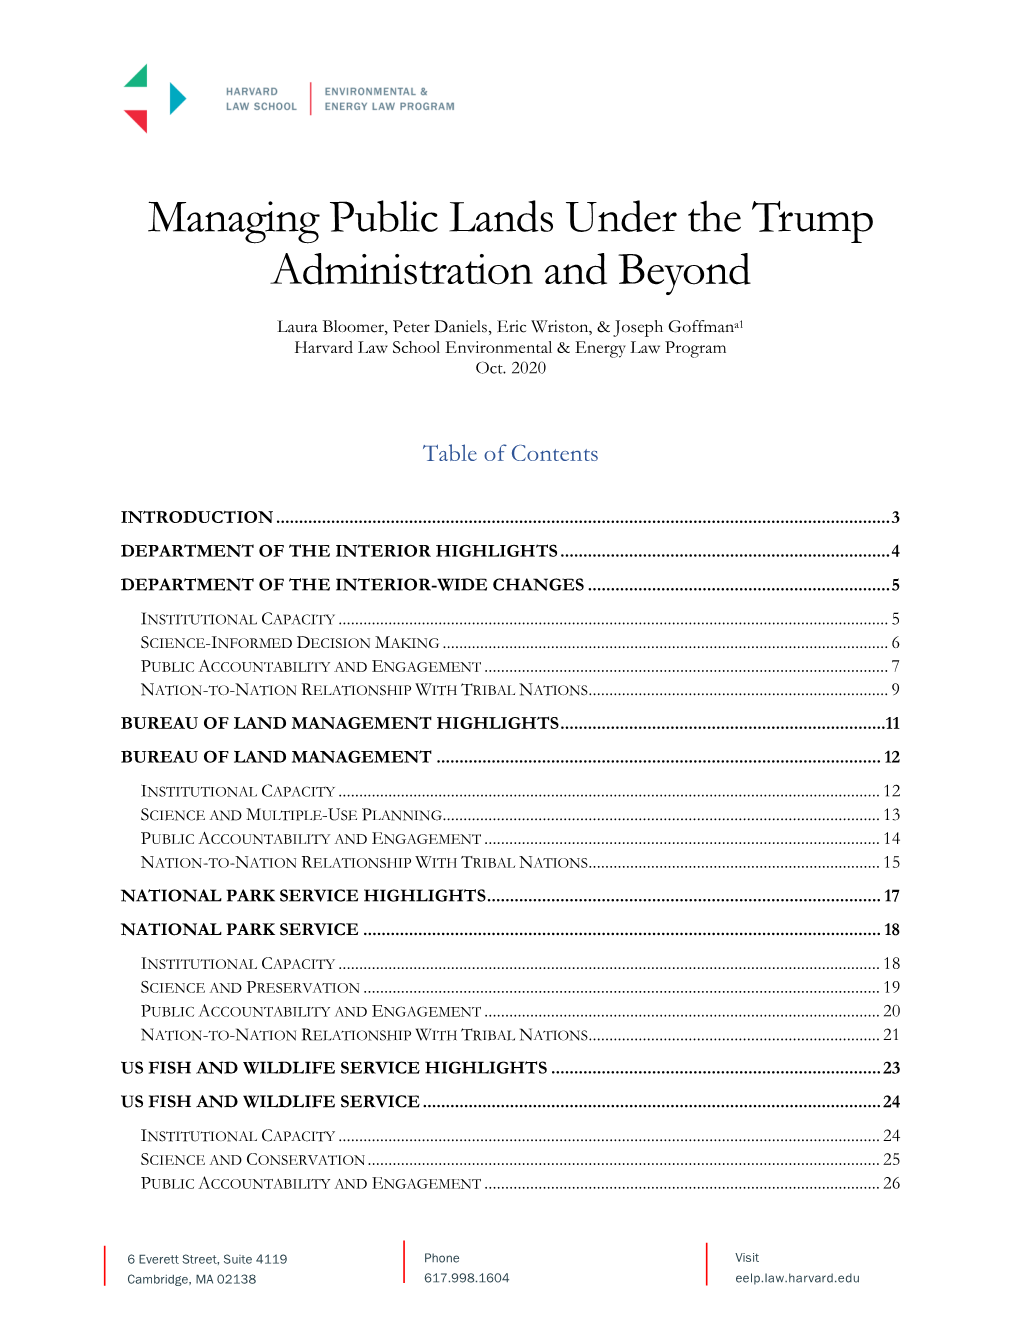 Managing Public Lands Under the Trump Administration and Beyond